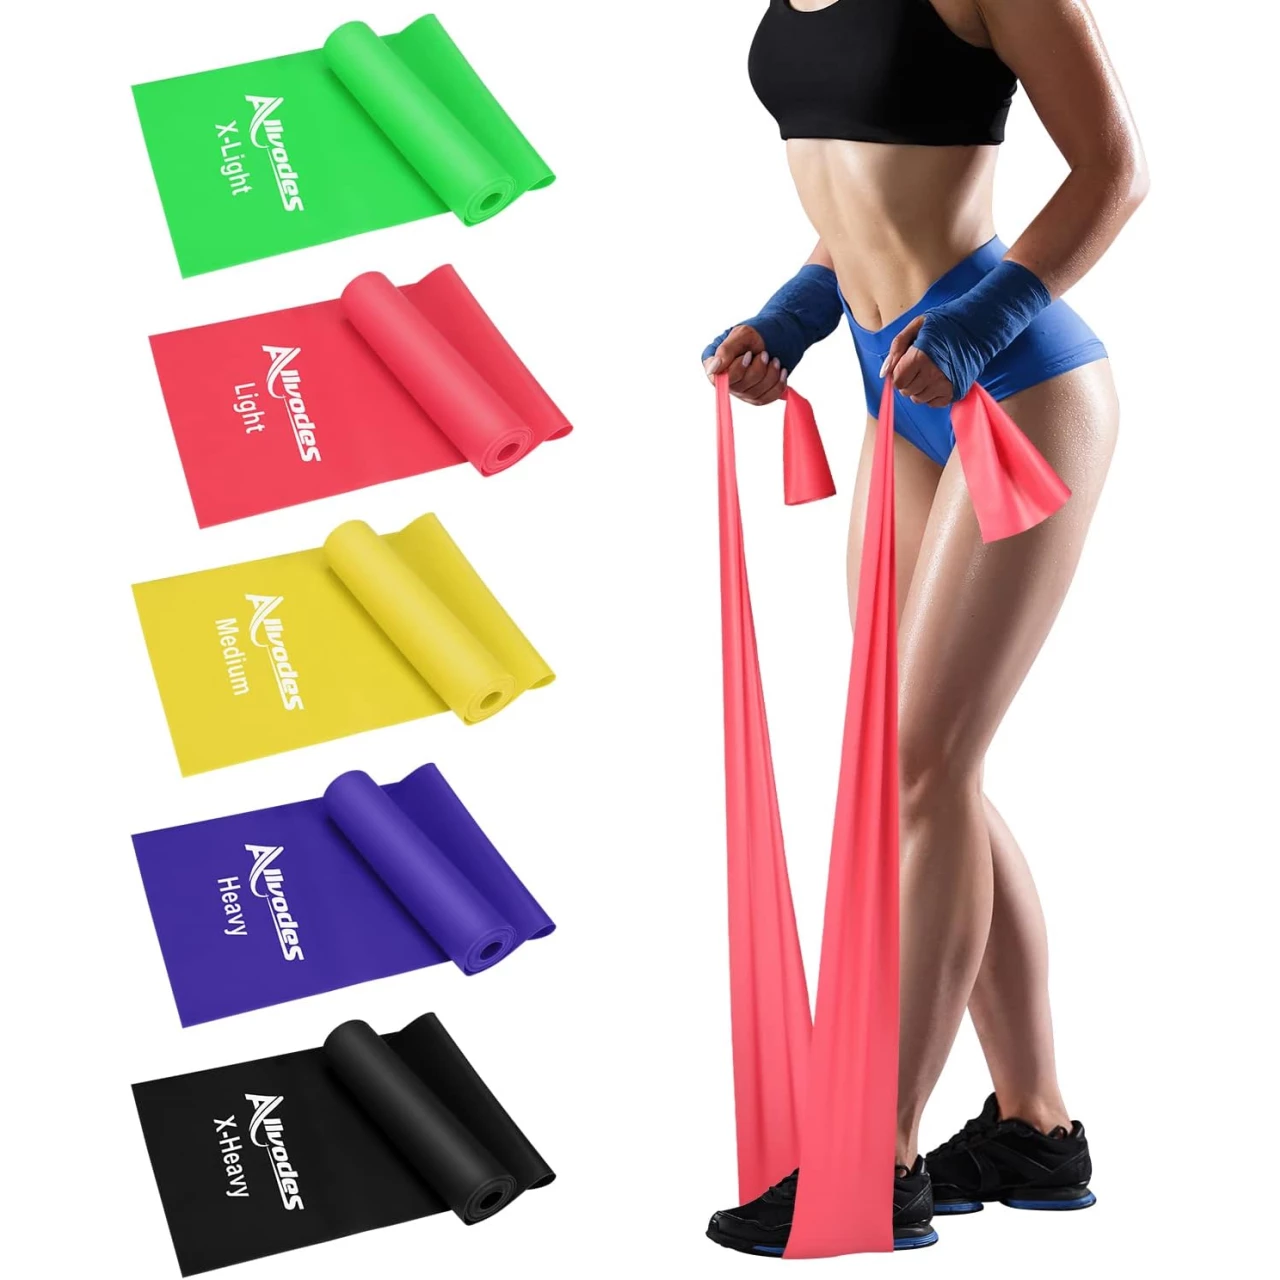 Allvodes Exercise Bands for Working Out, Resistance Bands Set with 5 Resistance Levels, Skin-Friendly Elastic Bands with Carrying Pouch for Home Workout, Strength Training, Yoga, Pilates